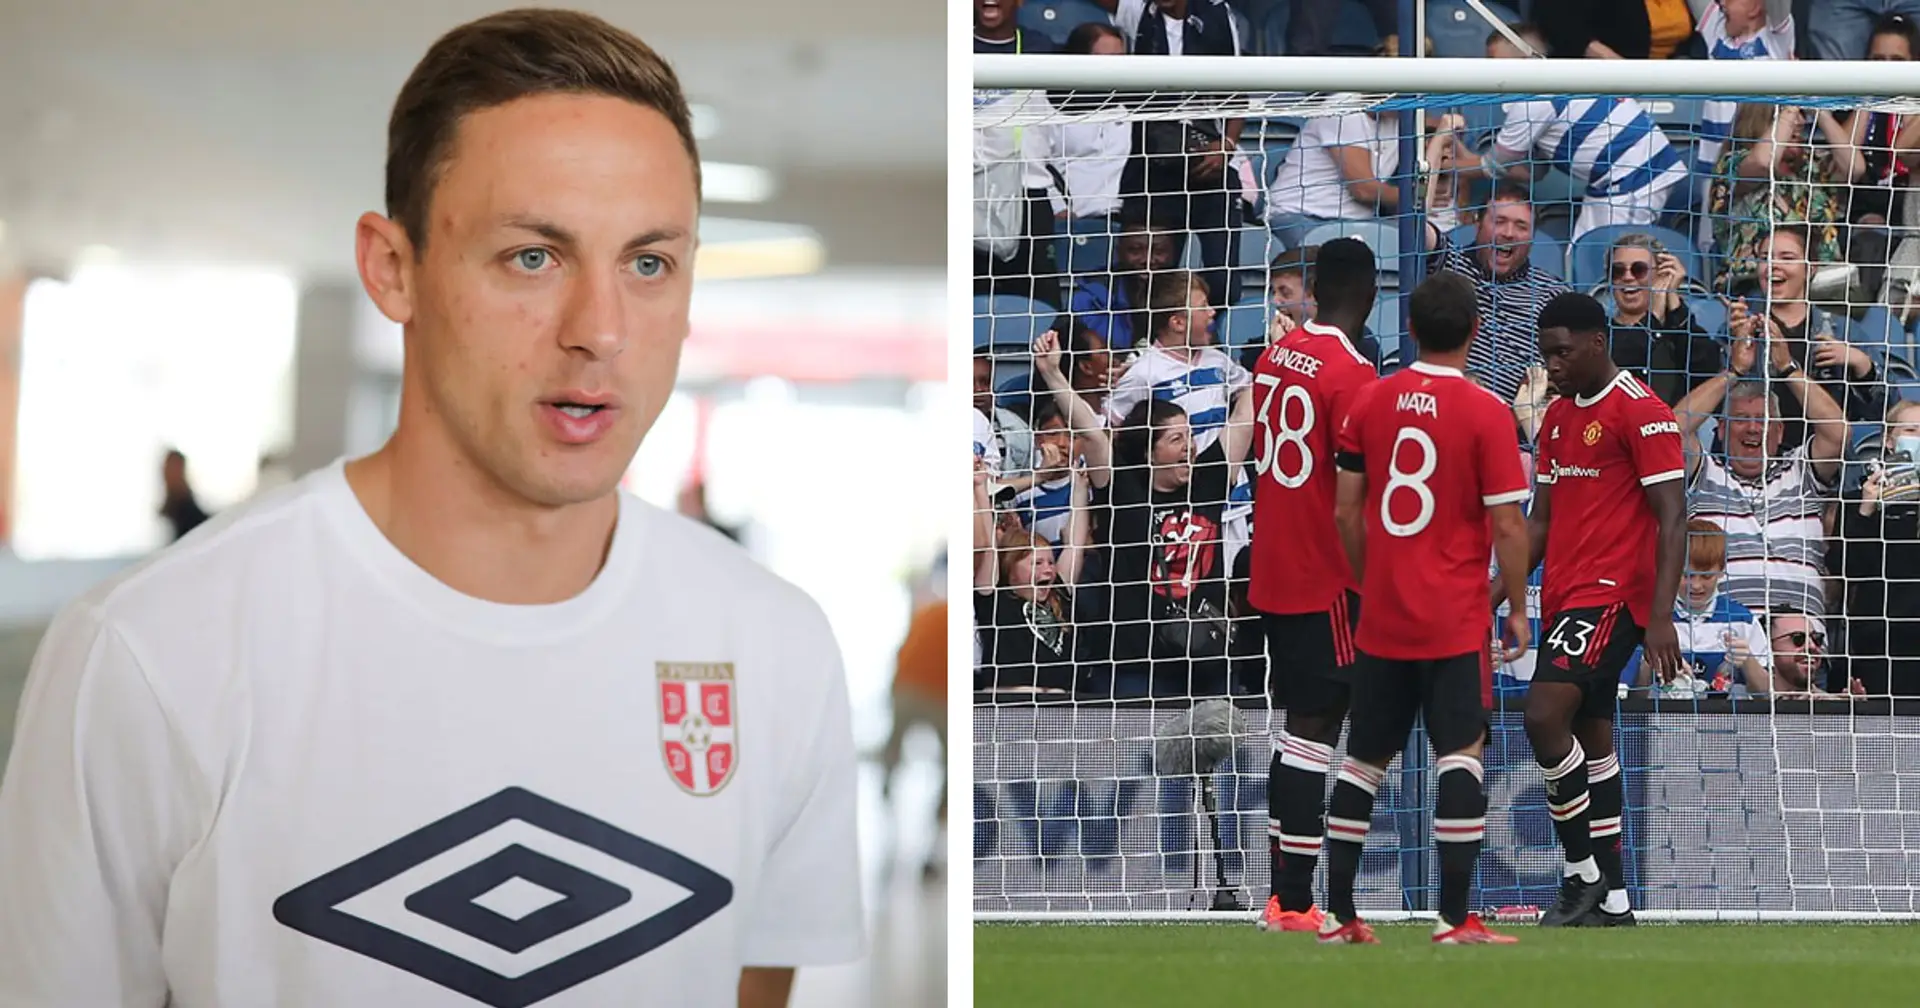 'They want to remember this': Matic explains how United youngsters can learn from QPR loss